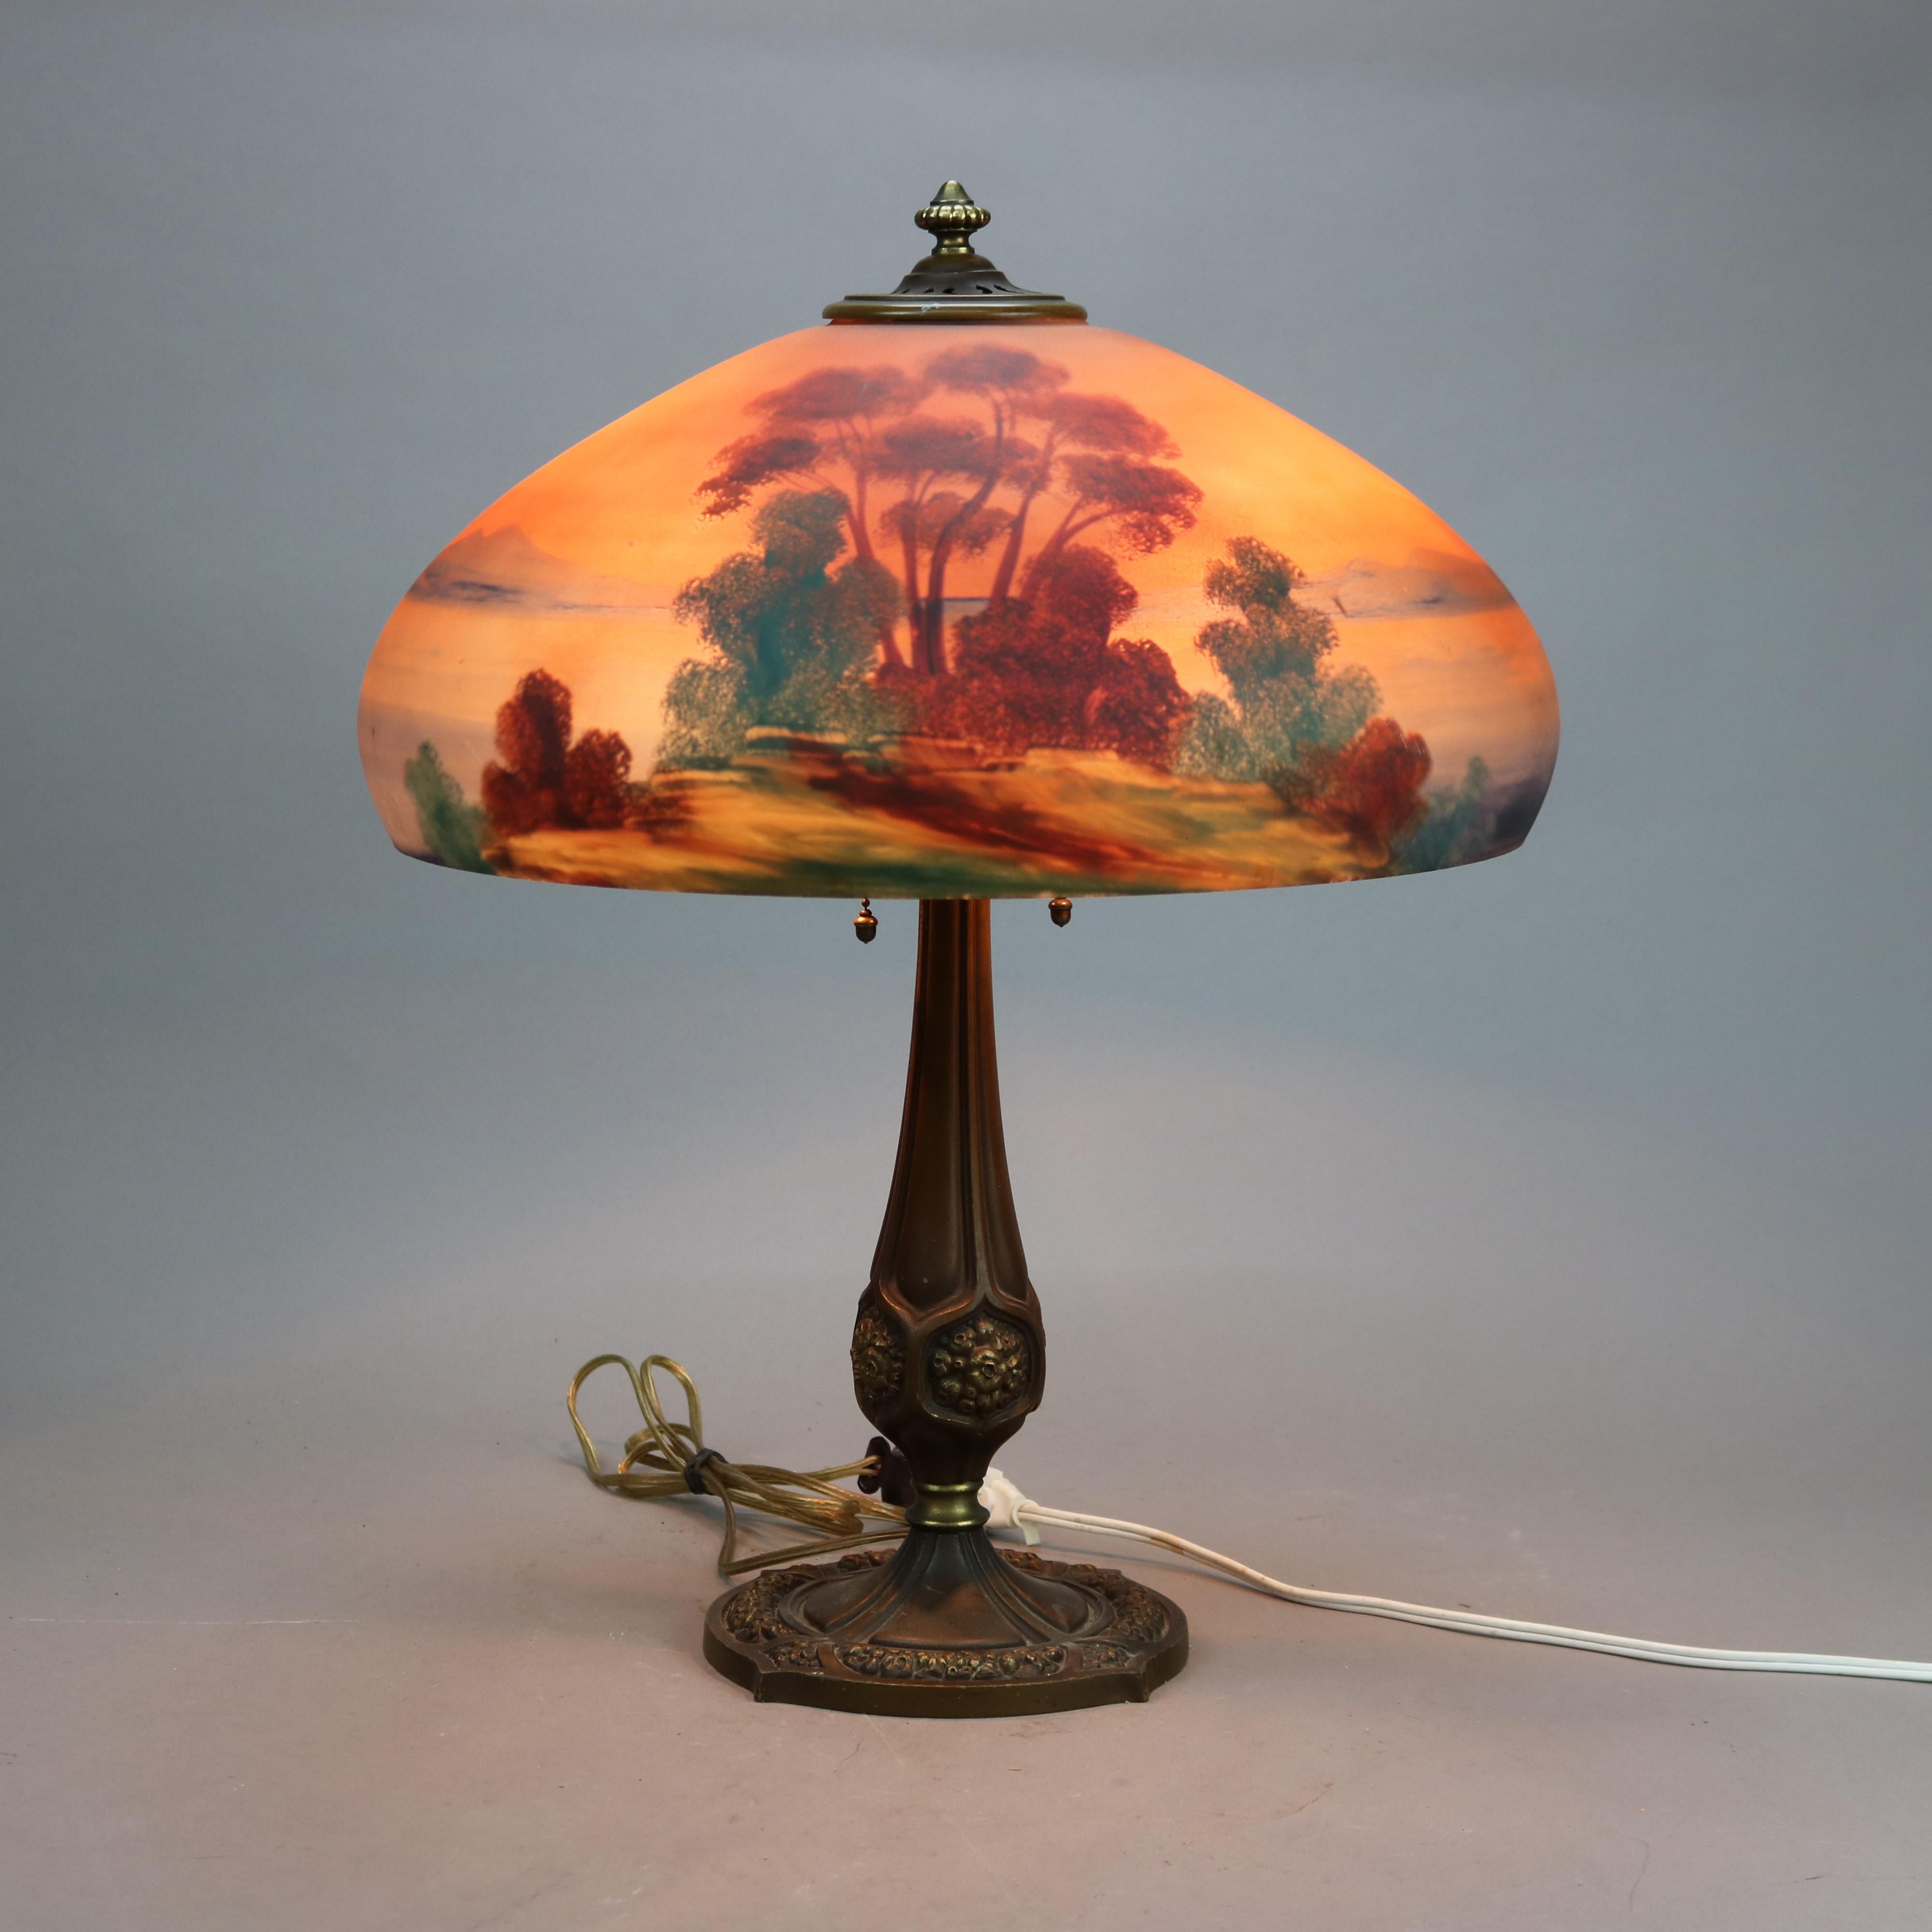 An antique Arts and Crafts table lamp by Pittsburgh Lamp Co offers dome shade having reverse painted landscape scene with lake over double socket base, c1920

Measures - 22''H x 17.5''W x 17.5''D.